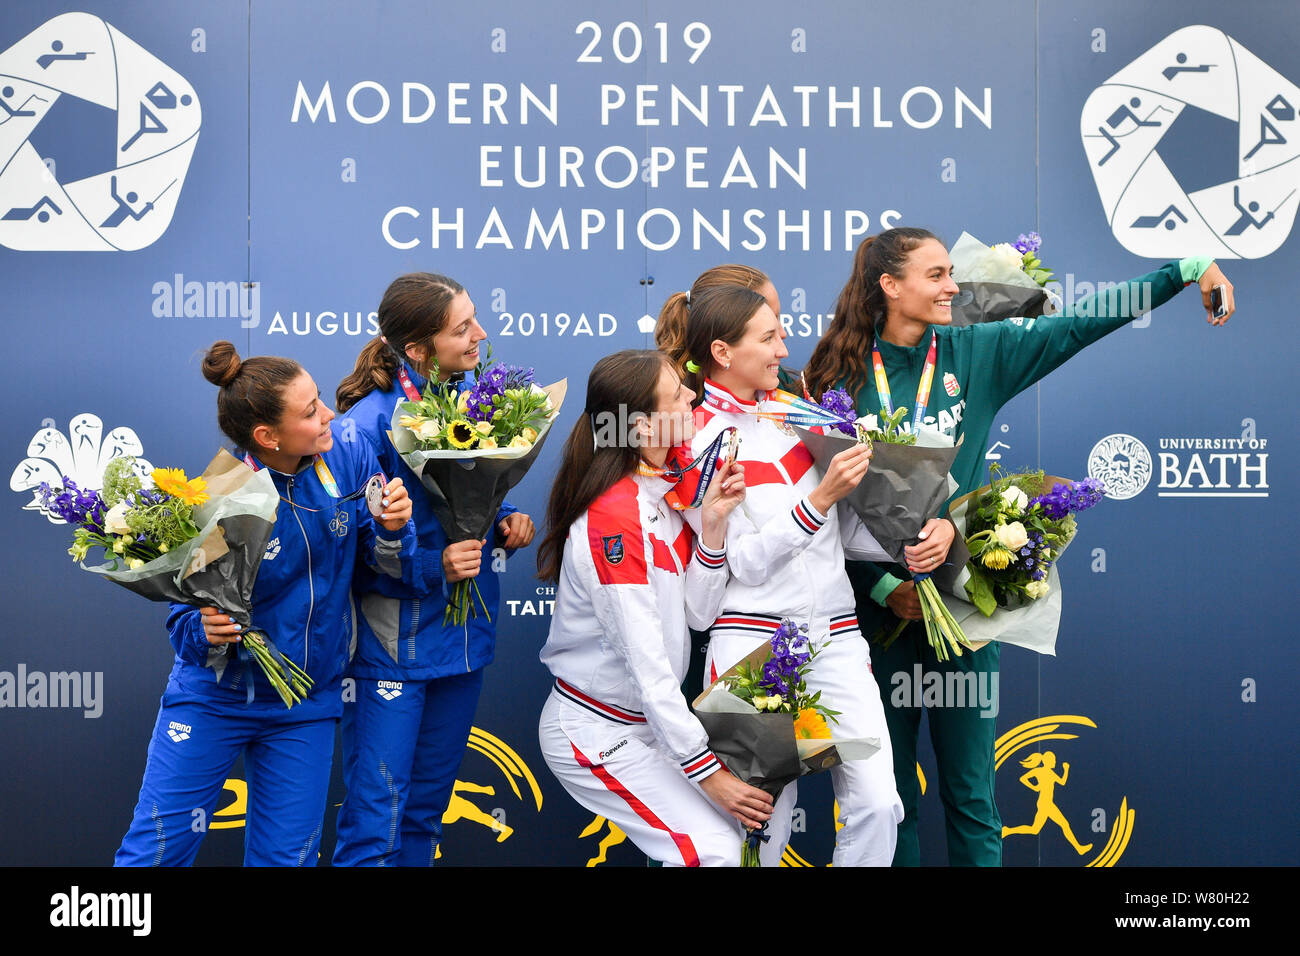 Italy (left) and Hungary (right) take a selfie on the podium after Russia's Anastasia Petrova (centre left) and Ekaterina Khuraskina (centre right) win the European Championship Women's Relay Gold during day two of the 2019 European Modern Pentathlon Championships at the University of Bath. Stock Photo